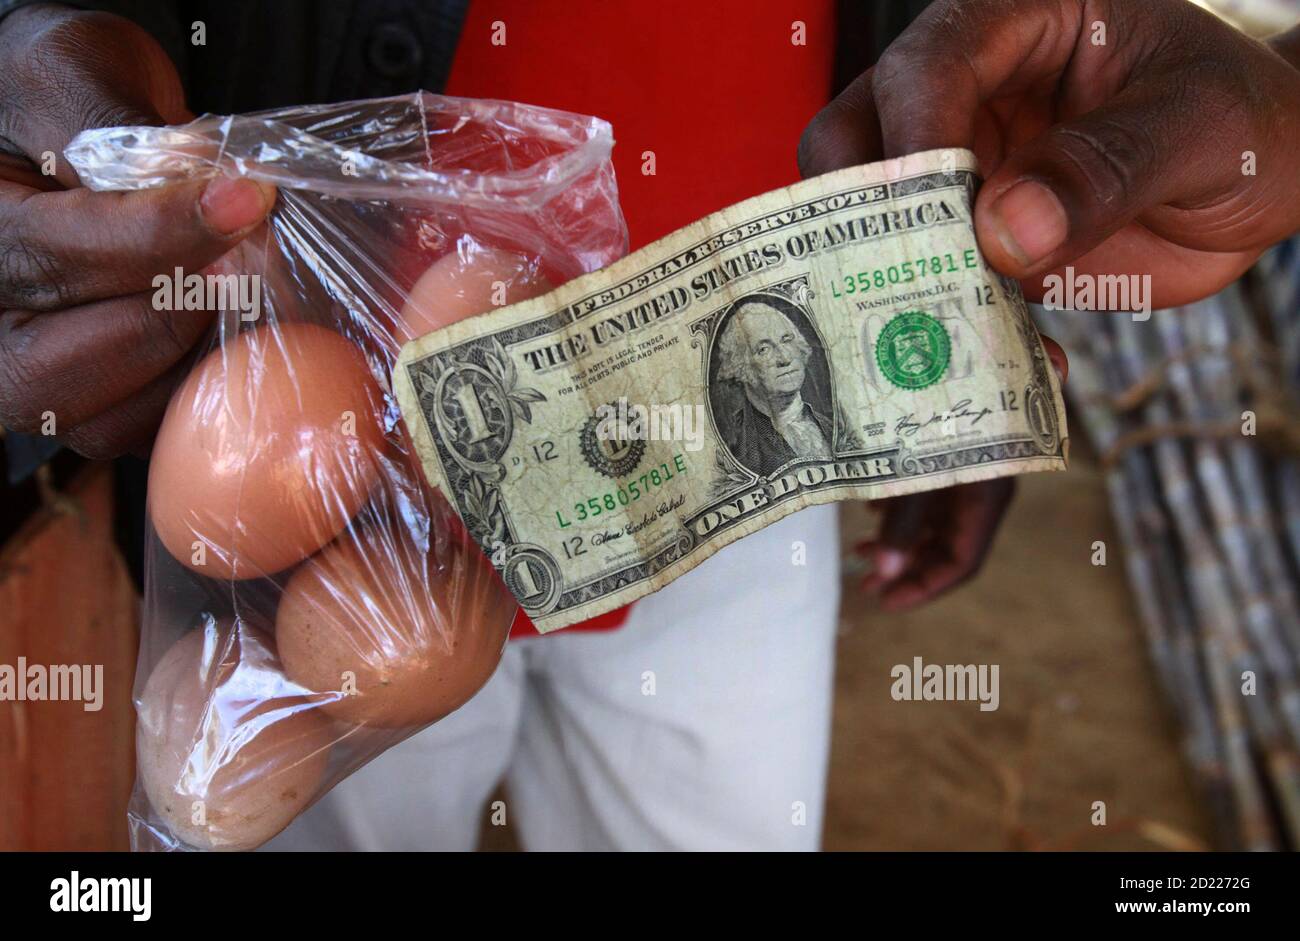 A man buy eggs using a U.S. one dollar bill at a market in Harare June 17,  2010. Zimbabwe's inflation quickened to 6.1 percent year-on-year in May  compared with 4.8 percent in